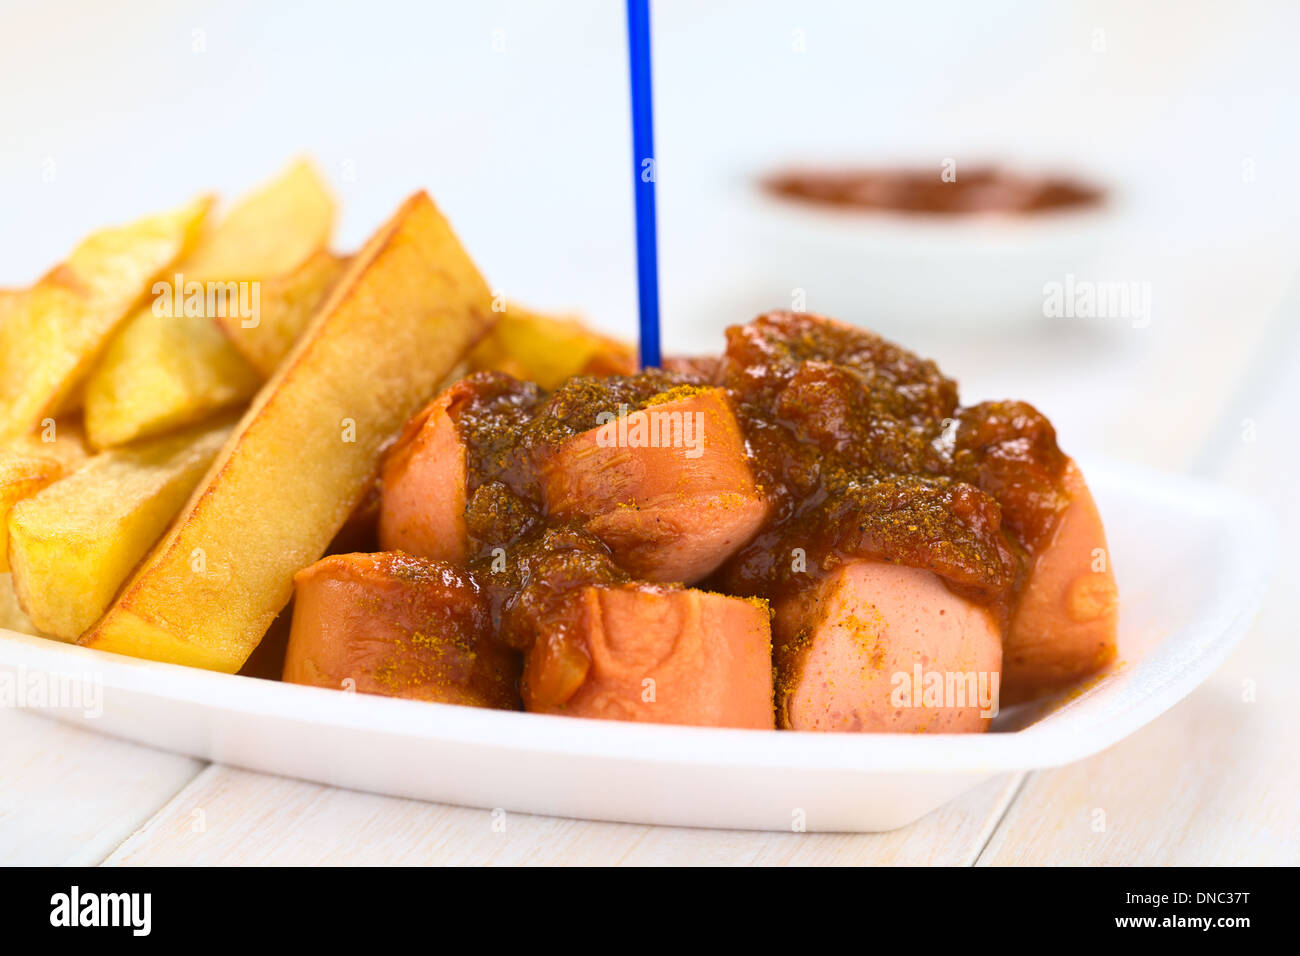 German fast food called Currywurst served with French fries on a disposable plate with plastic party fork Stock Photo